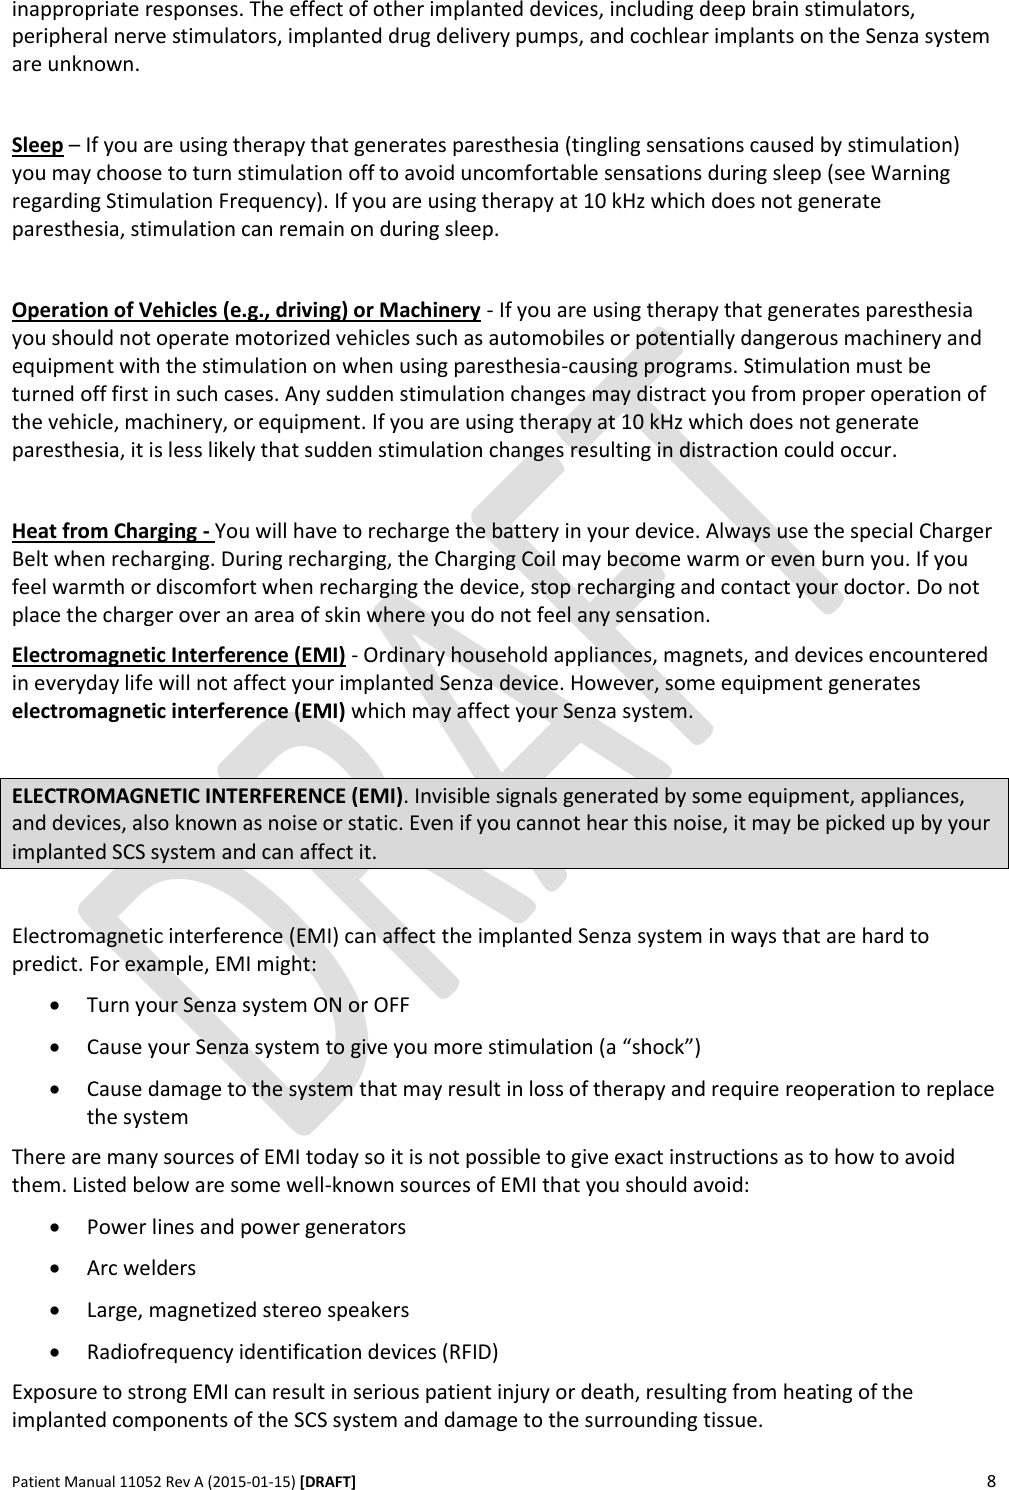      Patient Manual 11052 Rev A (2015-01-15) [DRAFT] 8   inappropriate responses. The effect of other implanted devices, including deep brain stimulators, peripheral nerve stimulators, implanted drug delivery pumps, and cochlear implants on the Senza system are unknown.   Sleep – If you are using therapy that generates paresthesia (tingling sensations caused by stimulation) you may choose to turn stimulation off to avoid uncomfortable sensations during sleep (see Warning regarding Stimulation Frequency). If you are using therapy at 10 kHz which does not generate paresthesia, stimulation can remain on during sleep.  Operation of Vehicles (e.g., driving) or Machinery - If you are using therapy that generates paresthesia you should not operate motorized vehicles such as automobiles or potentially dangerous machinery and equipment with the stimulation on when using paresthesia-causing programs. Stimulation must be turned off first in such cases. Any sudden stimulation changes may distract you from proper operation of the vehicle, machinery, or equipment. If you are using therapy at 10 kHz which does not generate paresthesia, it is less likely that sudden stimulation changes resulting in distraction could occur.  Heat from Charging - You will have to recharge the battery in your device. Always use the special Charger Belt when recharging. During recharging, the Charging Coil may become warm or even burn you. If you feel warmth or discomfort when recharging the device, stop recharging and contact your doctor. Do not place the charger over an area of skin where you do not feel any sensation. Electromagnetic Interference (EMI) - Ordinary household appliances, magnets, and devices encountered in everyday life will not affect your implanted Senza device. However, some equipment generates electromagnetic interference (EMI) which may affect your Senza system.  ELECTROMAGNETIC INTERFERENCE (EMI). Invisible signals generated by some equipment, appliances, and devices, also known as noise or static. Even if you cannot hear this noise, it may be picked up by your implanted SCS system and can affect it.  Electromagnetic interference (EMI) can affect the implanted Senza system in ways that are hard to predict. For example, EMI might:  Turn your Senza system ON or OFF  Cause your Senza system to give you more stimulation (a “shock”)  Cause damage to the system that may result in loss of therapy and require reoperation to replace the system There are many sources of EMI today so it is not possible to give exact instructions as to how to avoid them. Listed below are some well-known sources of EMI that you should avoid:  Power lines and power generators  Arc welders  Large, magnetized stereo speakers  Radiofrequency identification devices (RFID) Exposure to strong EMI can result in serious patient injury or death, resulting from heating of the implanted components of the SCS system and damage to the surrounding tissue. 